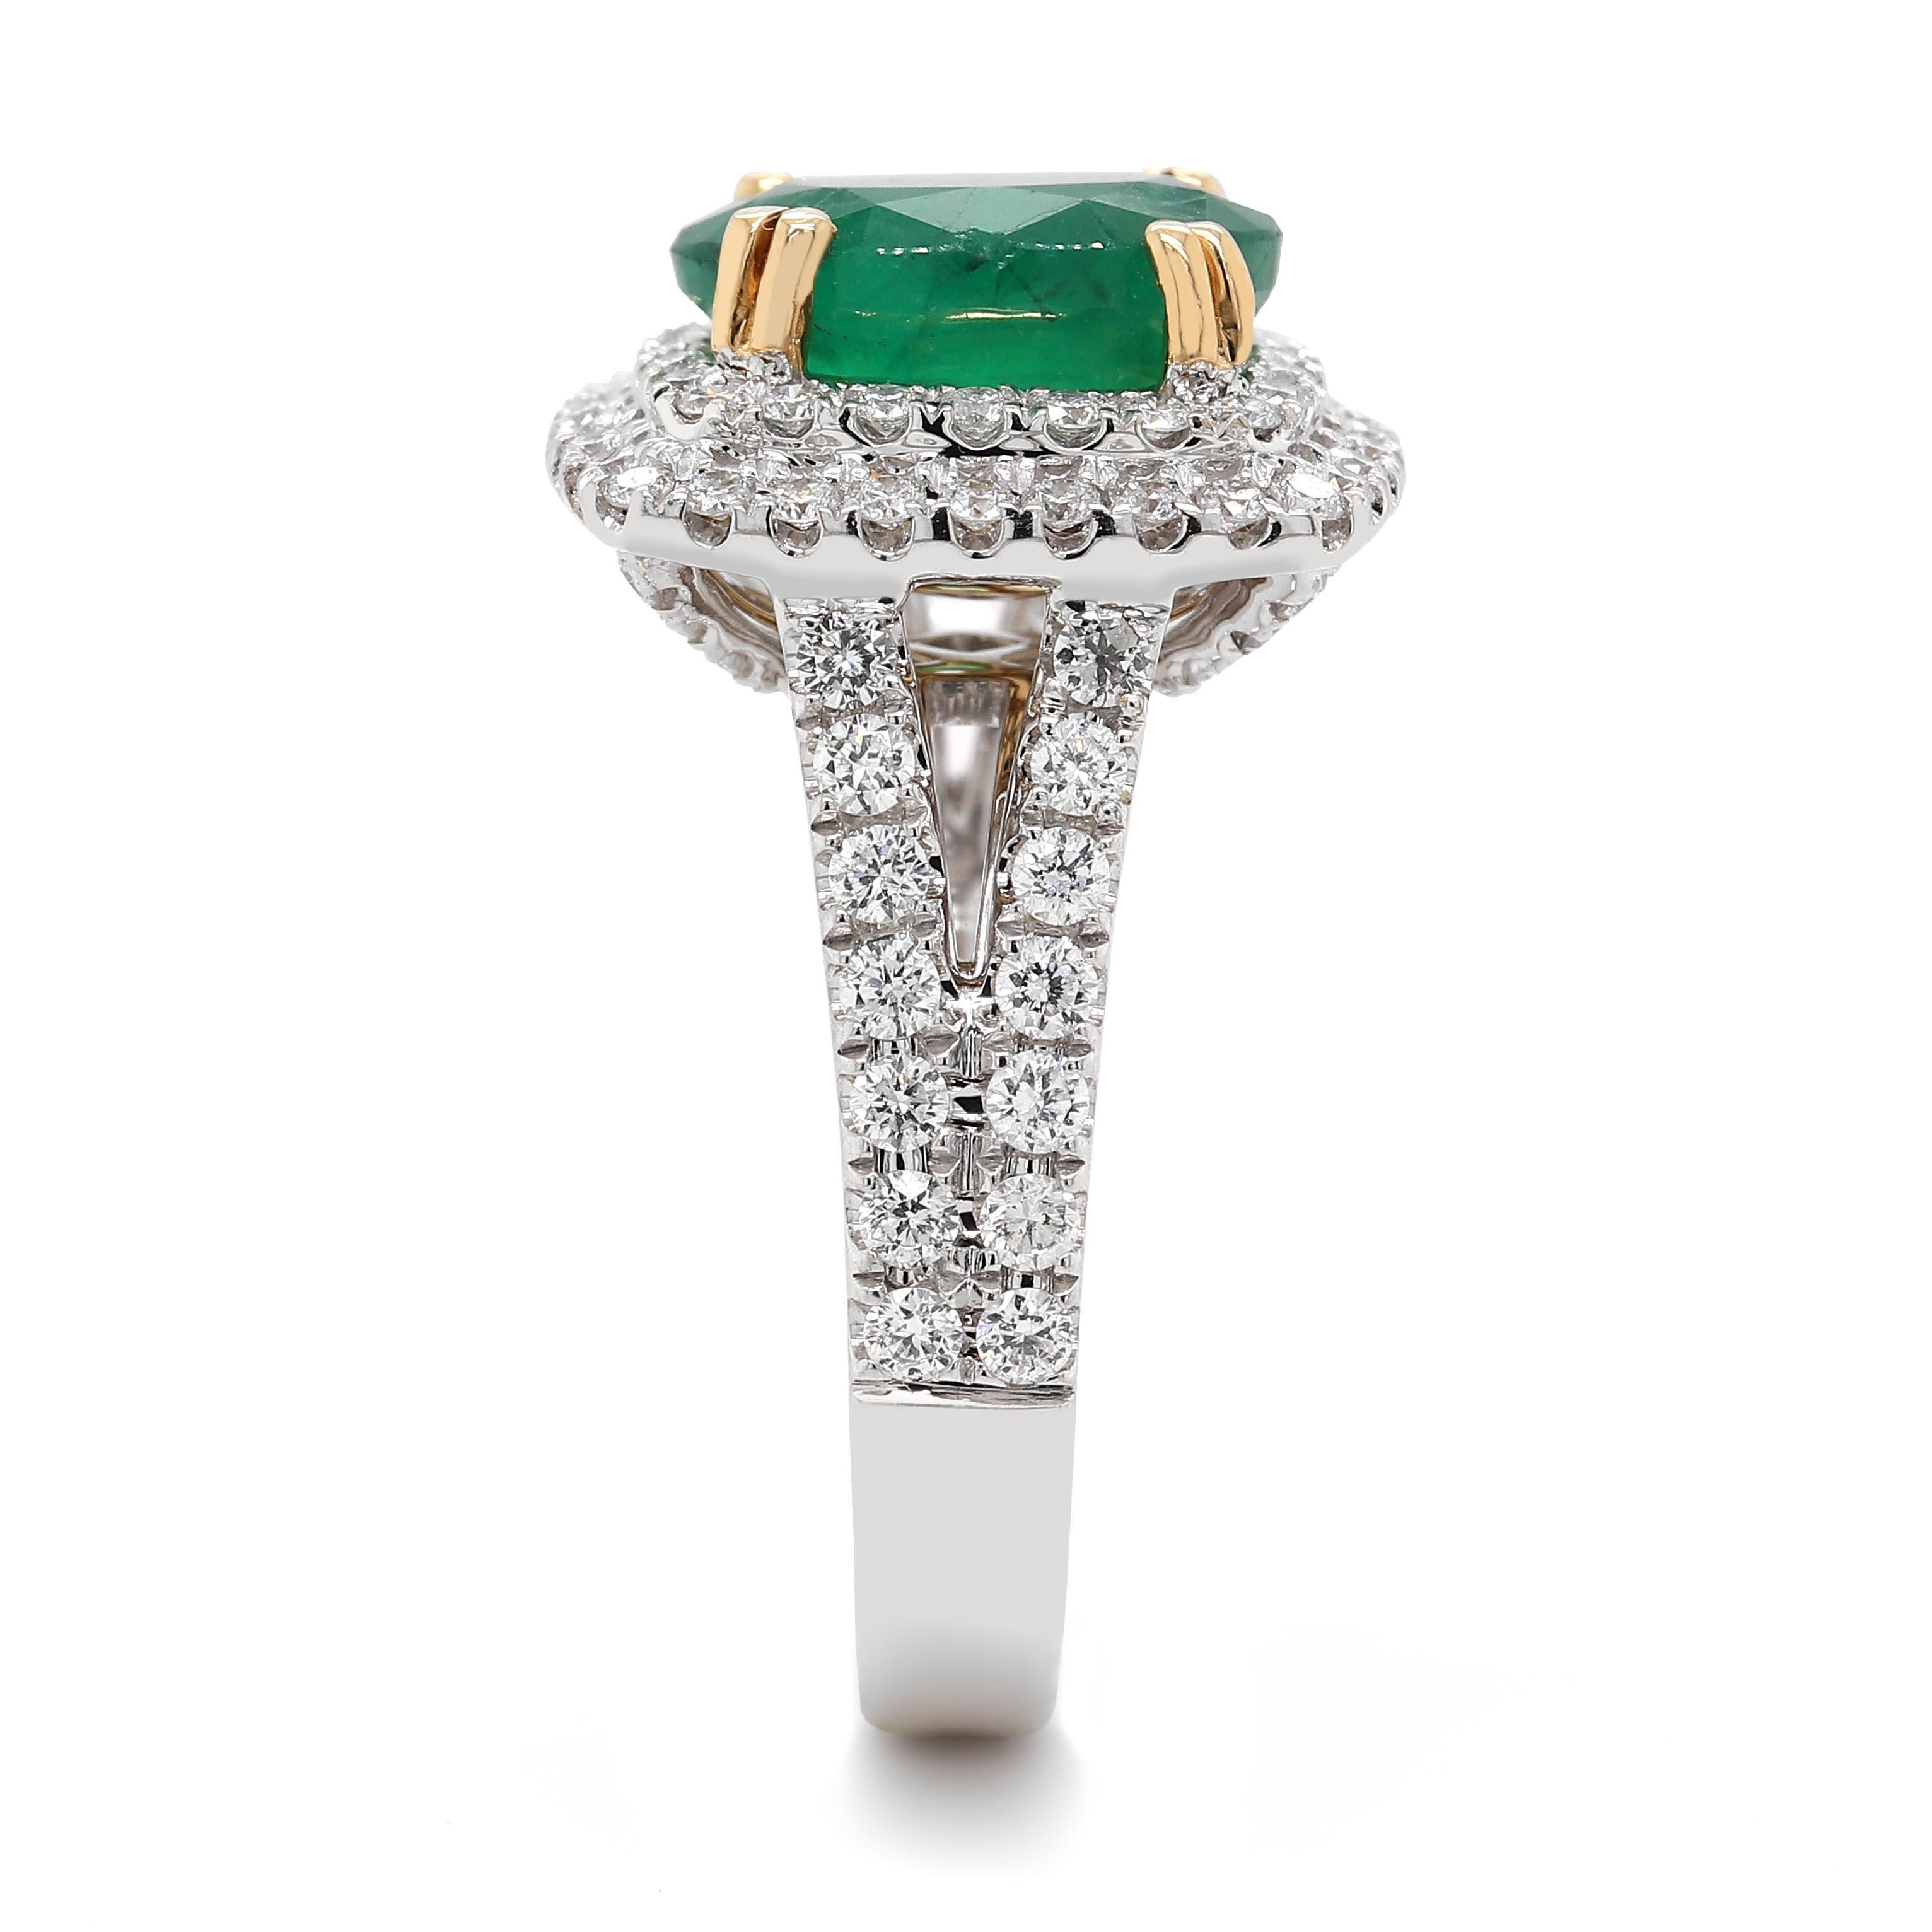 Ring containing one fine oval emerald of about 3.03 carats measuring 8.23×8.41×6.01mm. The emerald is surrounded by 96 round brilliant cut diamonds of about 1.06 carats with a clarity of VS and color G. All stones are set in 18k 2 tone. The total of